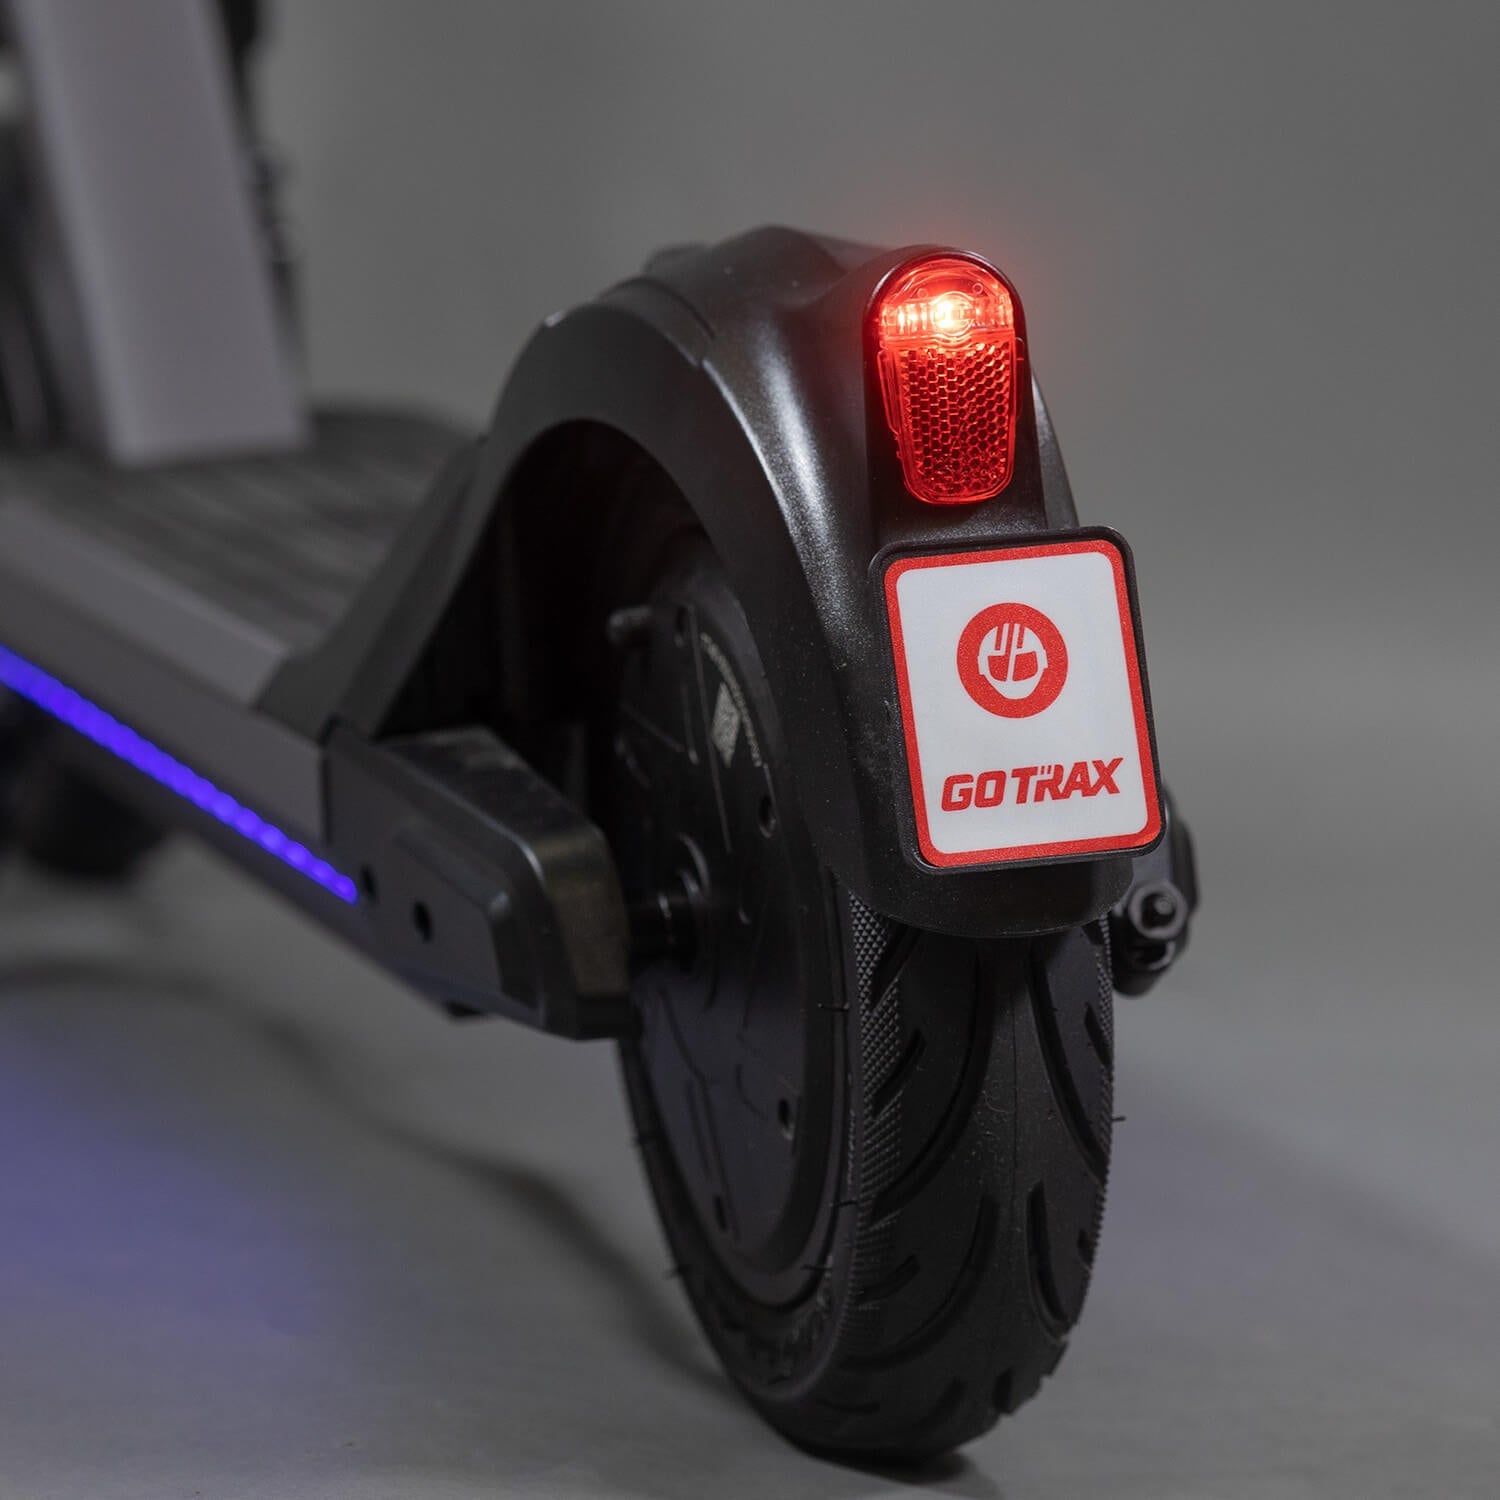 Gotrax G6 Performance Electric Scooter Foldable Plus Ambient Lights 10*2.5"-Max 51KM Range & 32KPH Max Speed